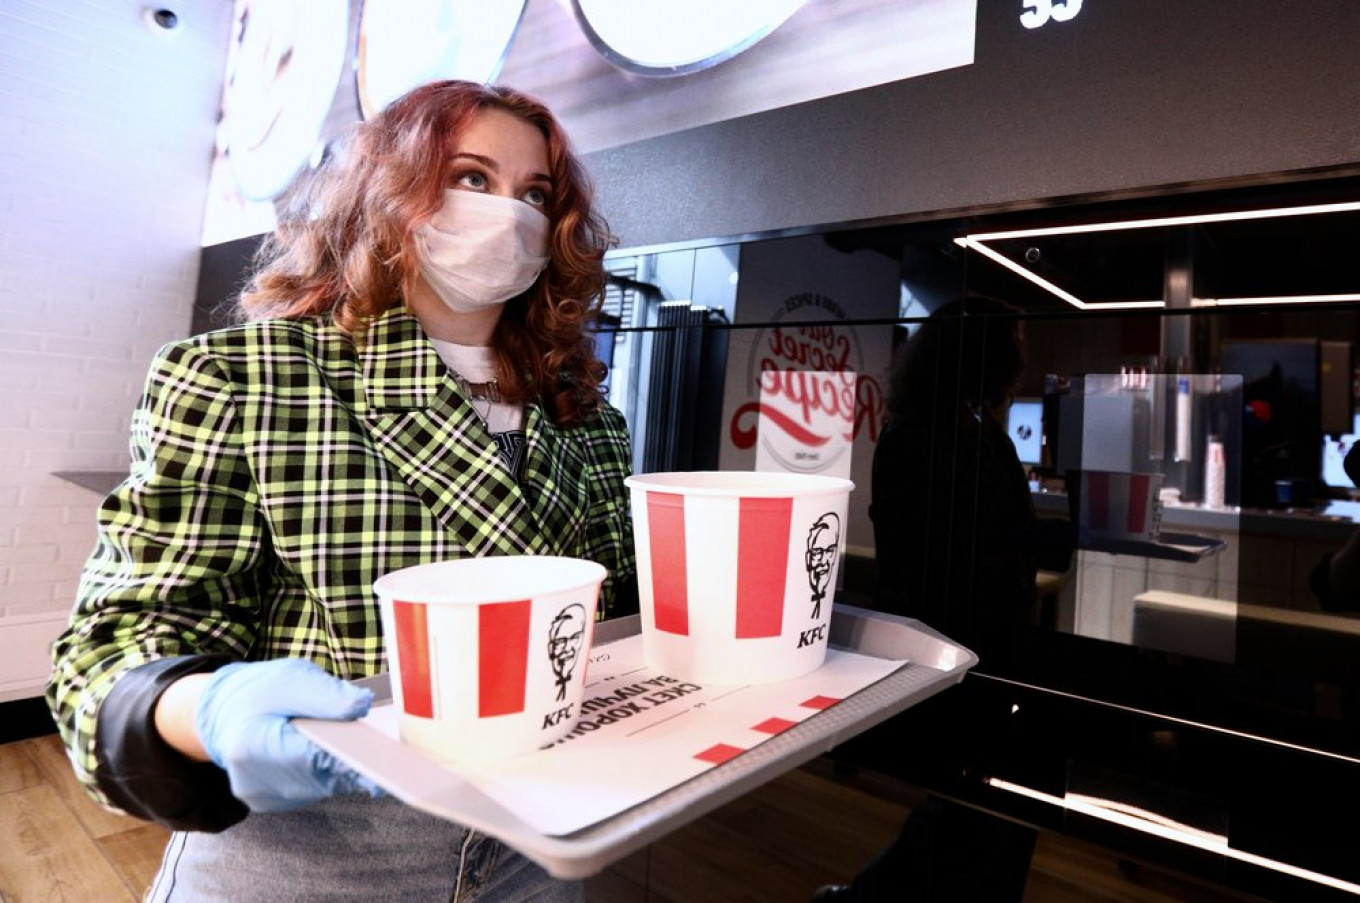 KFC Tests 3D-Printed Chicken Nuggets in Russia